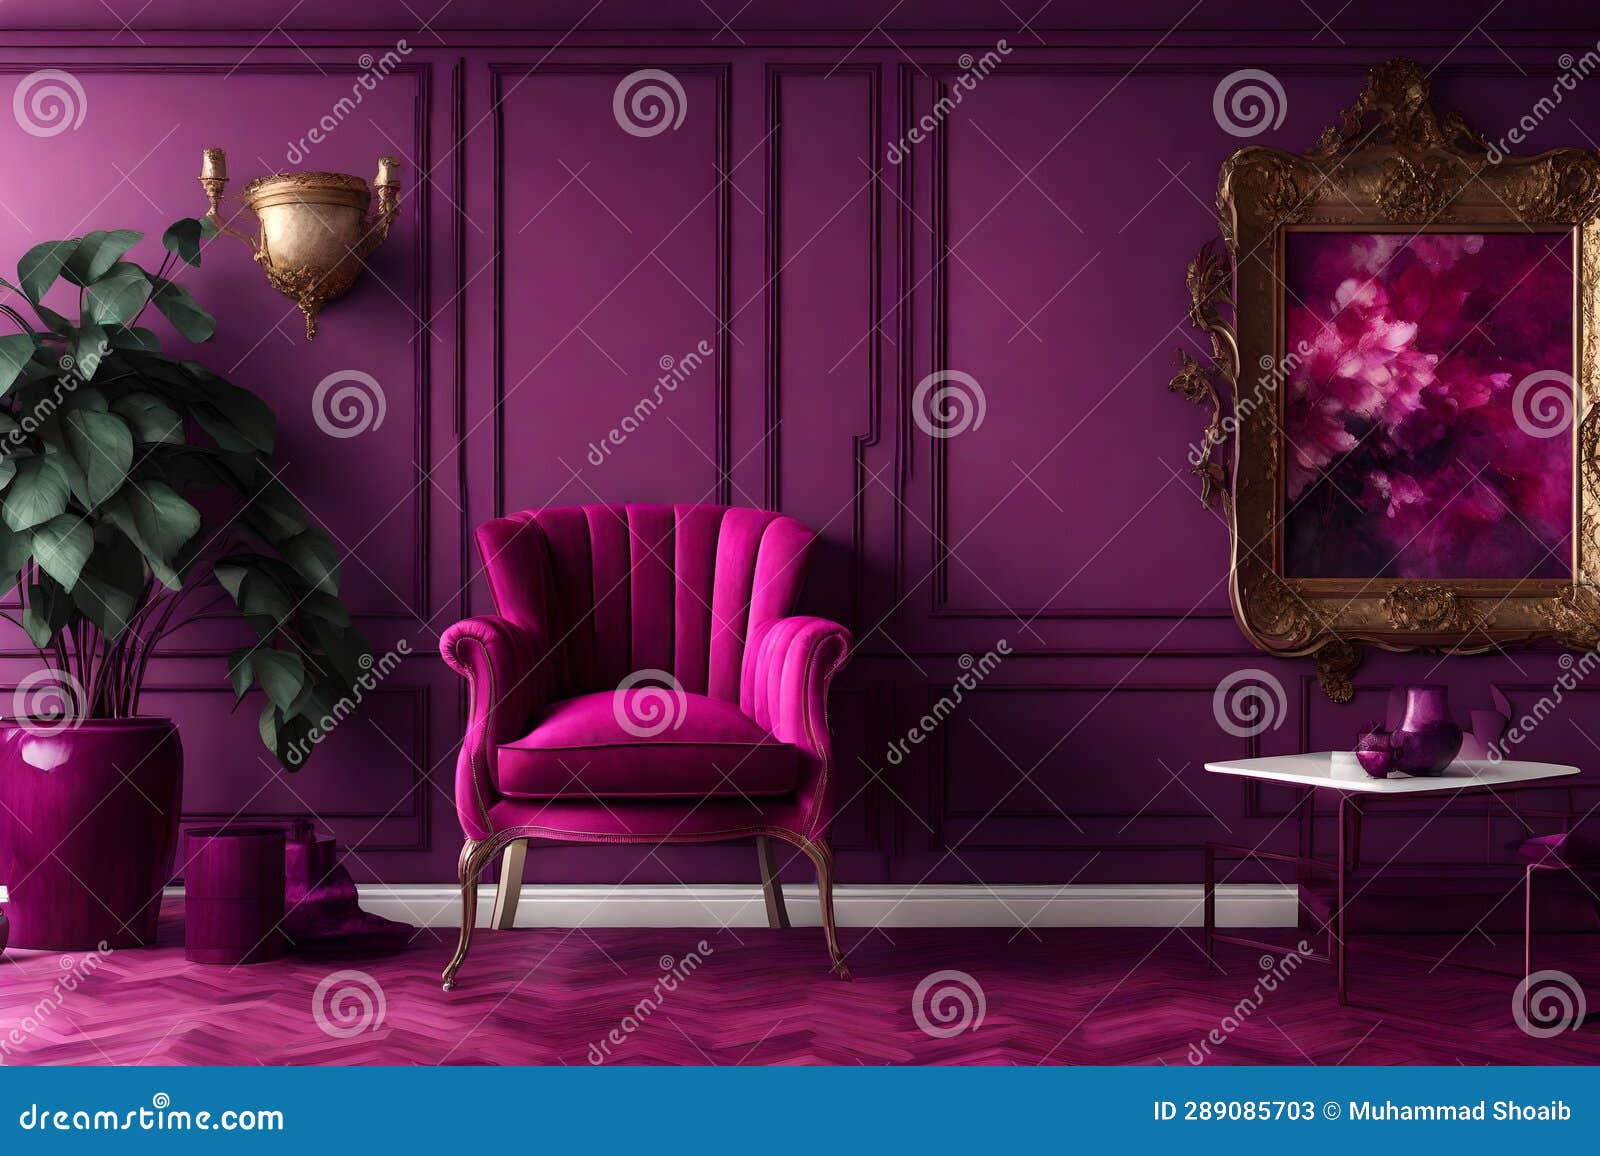 Fuchsia Color or Dark Plum in the Interior. Armchair and Wall Mokup for ...